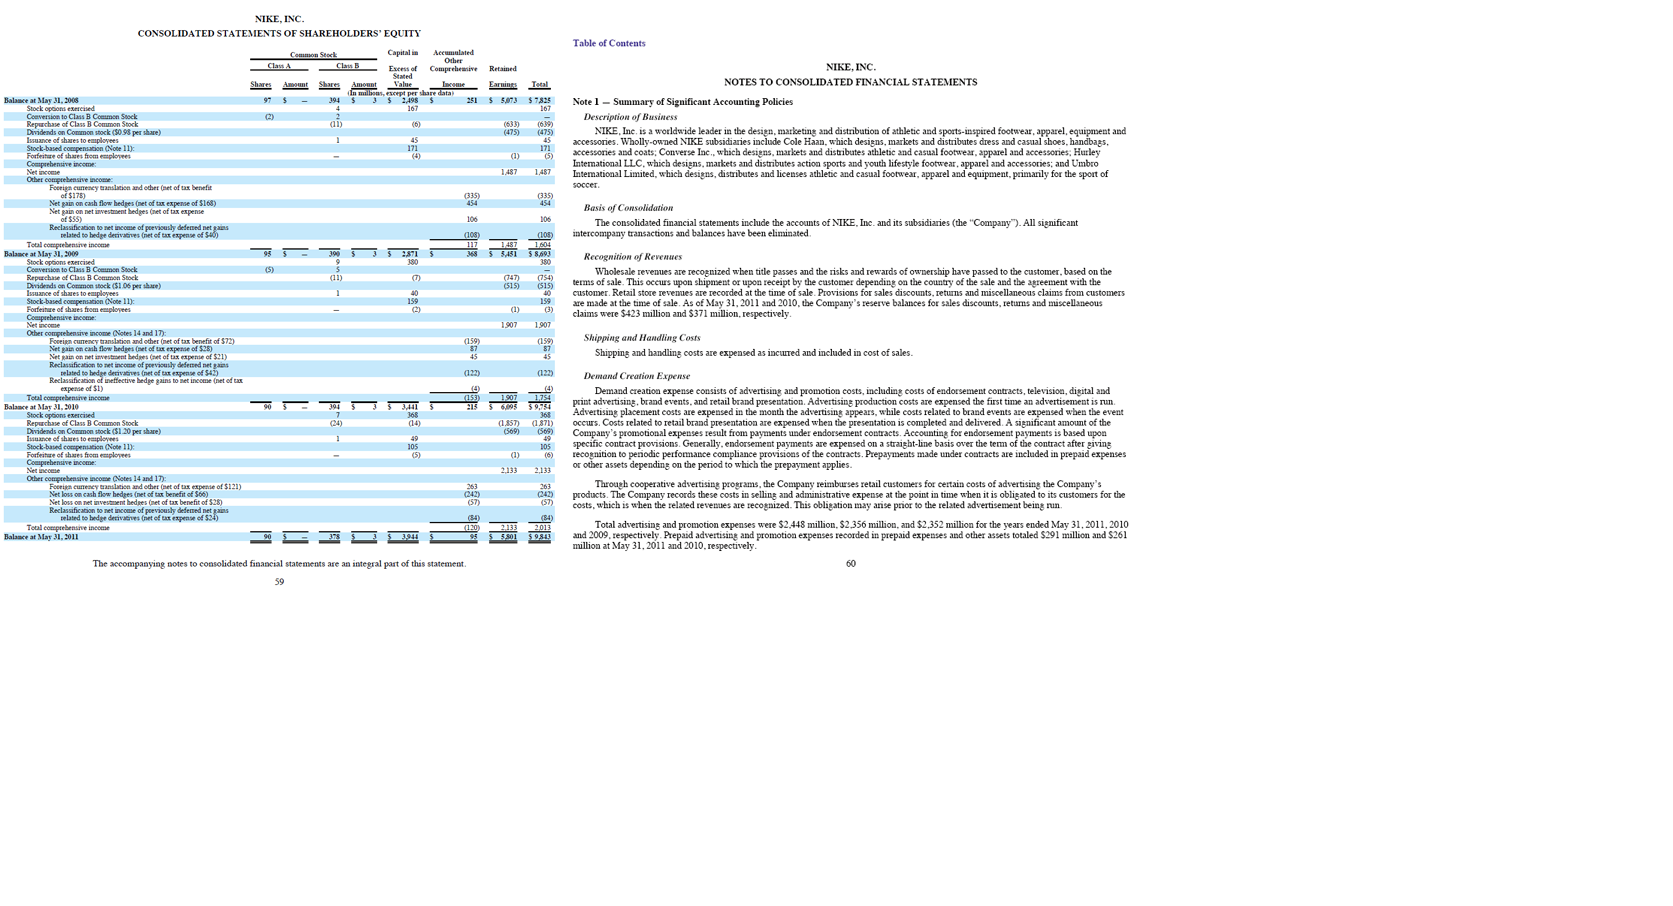 NIKE INC FORM 10-K Annual Report) Filed 07/22/11 for |